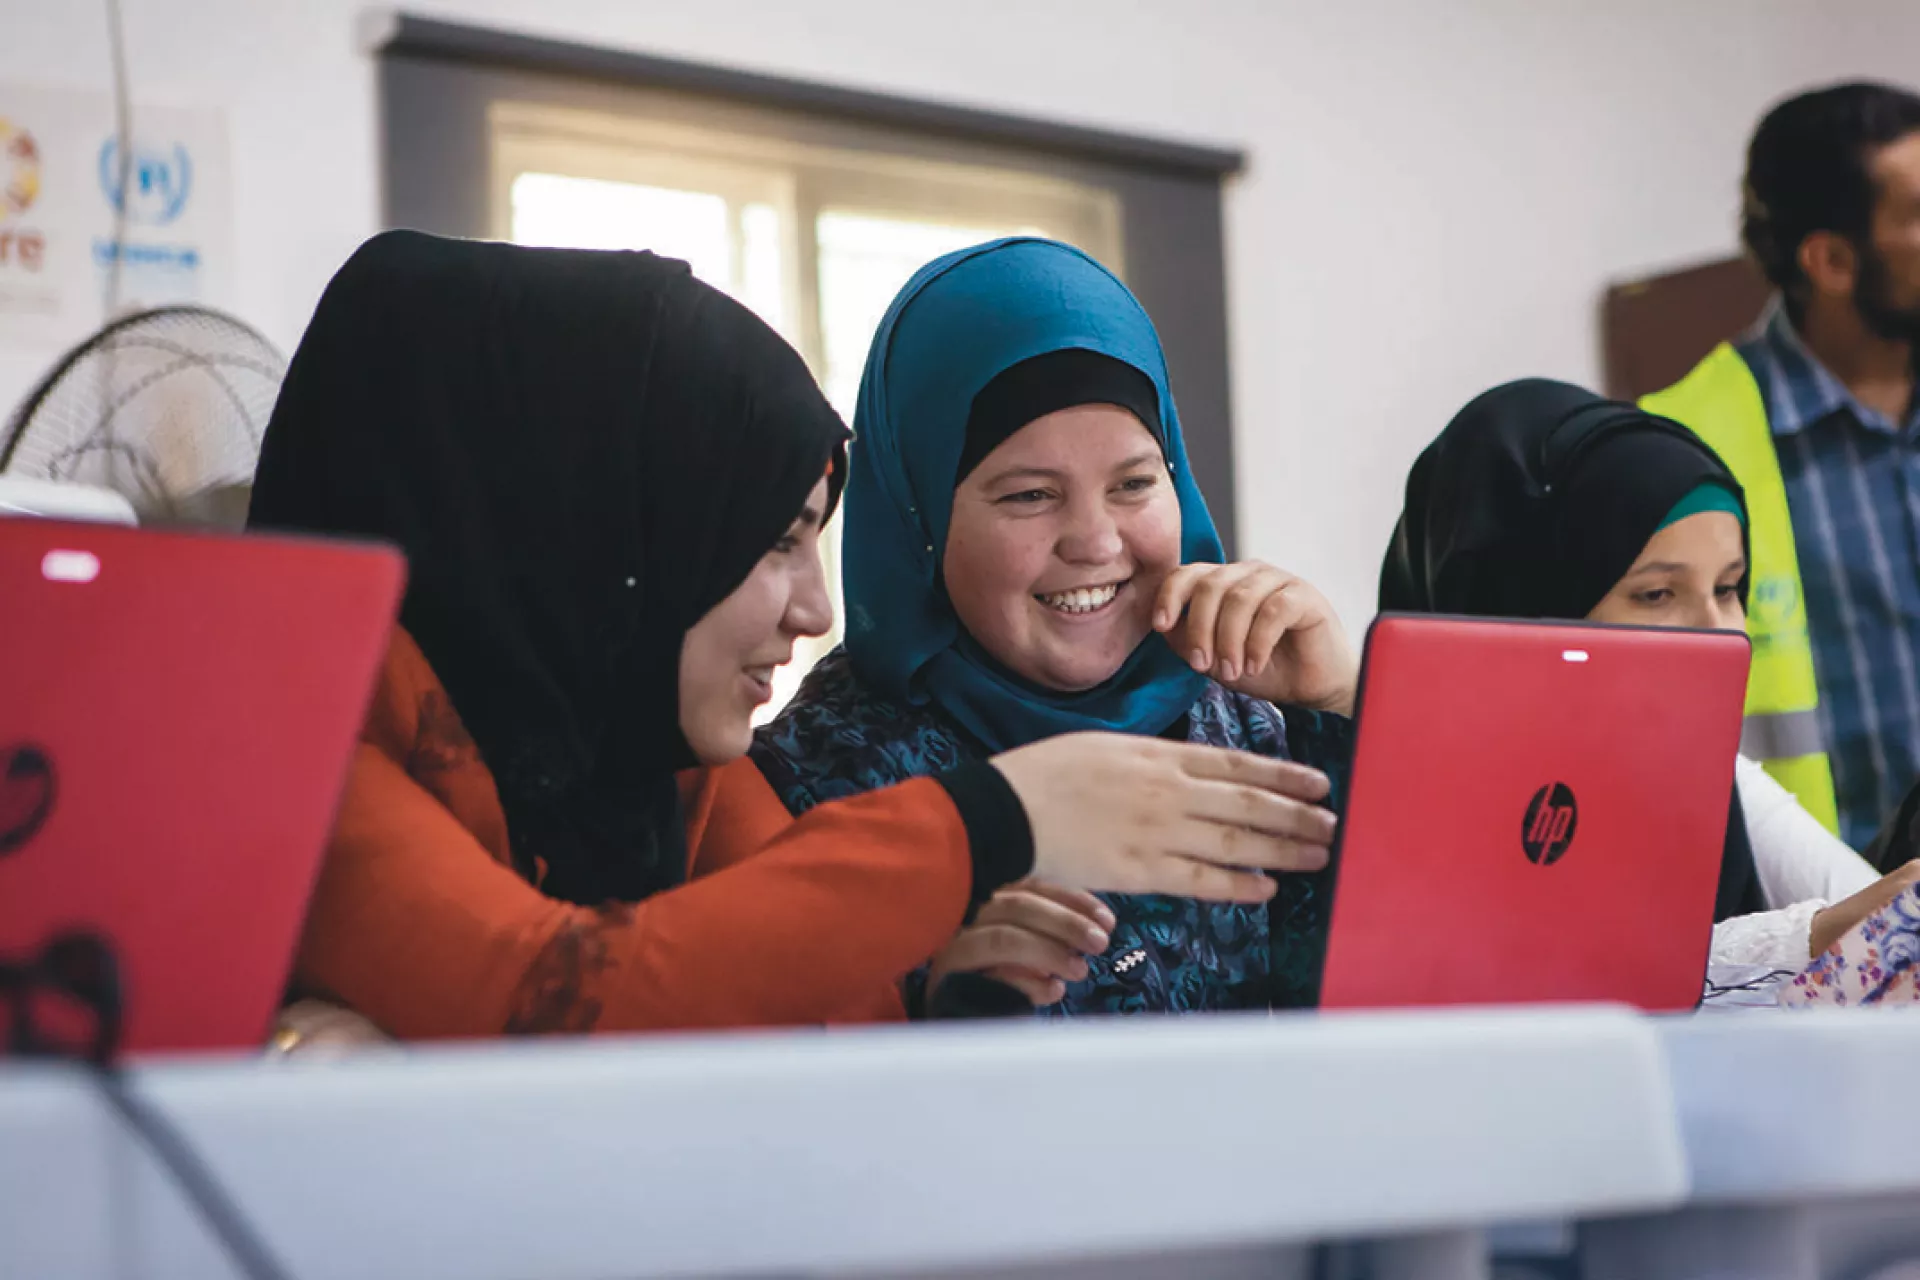 Three adolescent girls working on a computer and laughing, with their instructor in the back